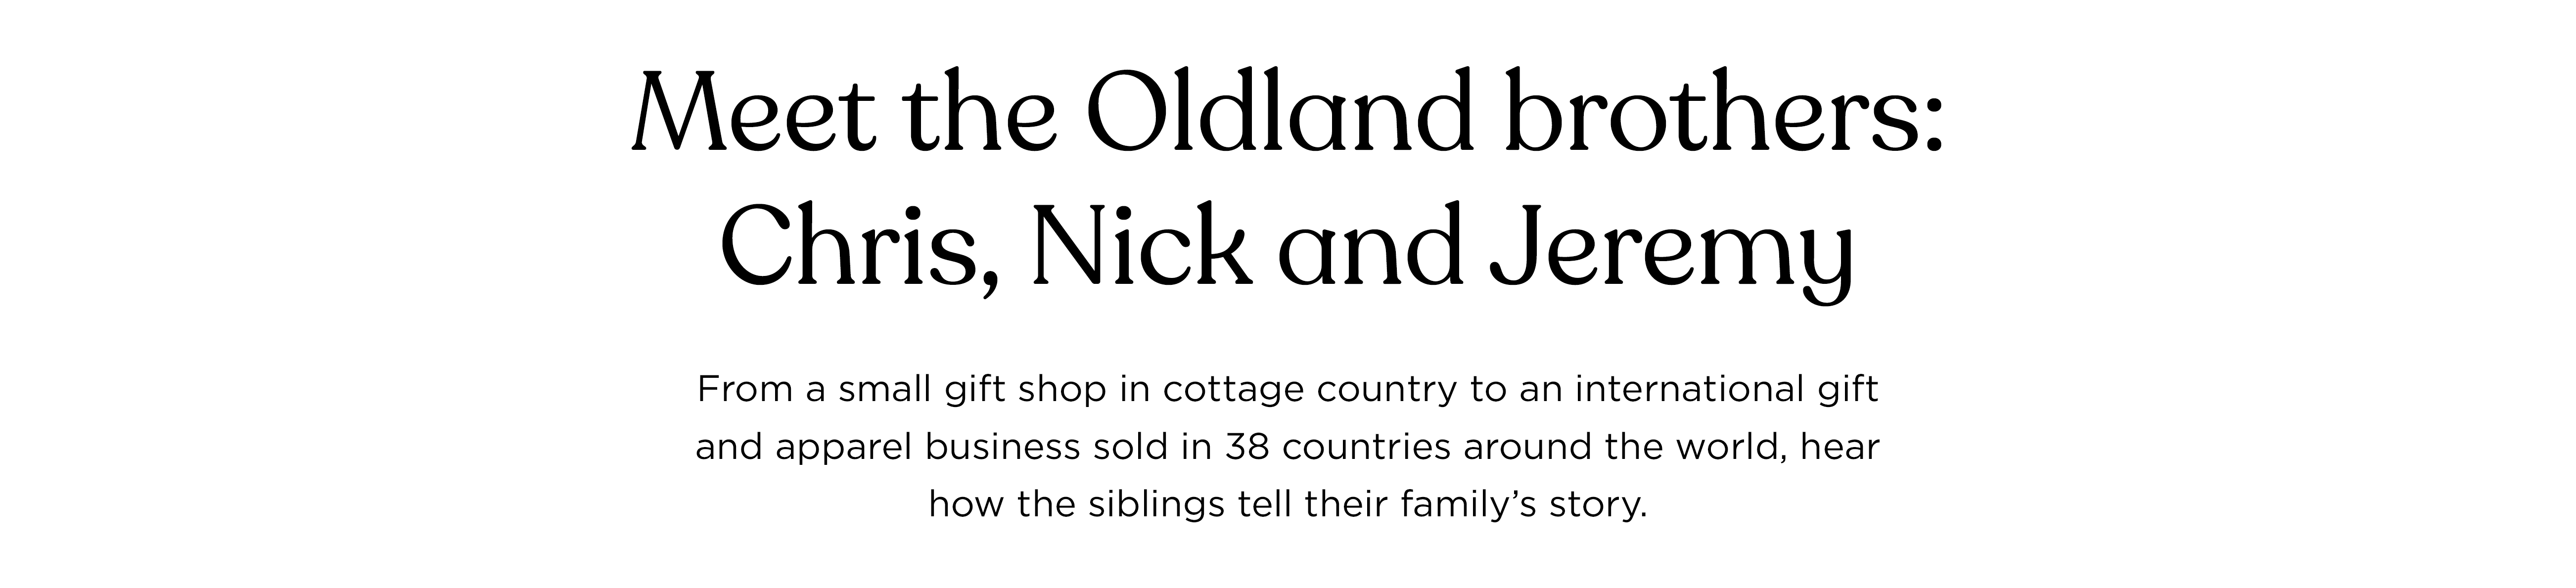 Meet the Oldland brothers: Chris, Nick and Jeremy